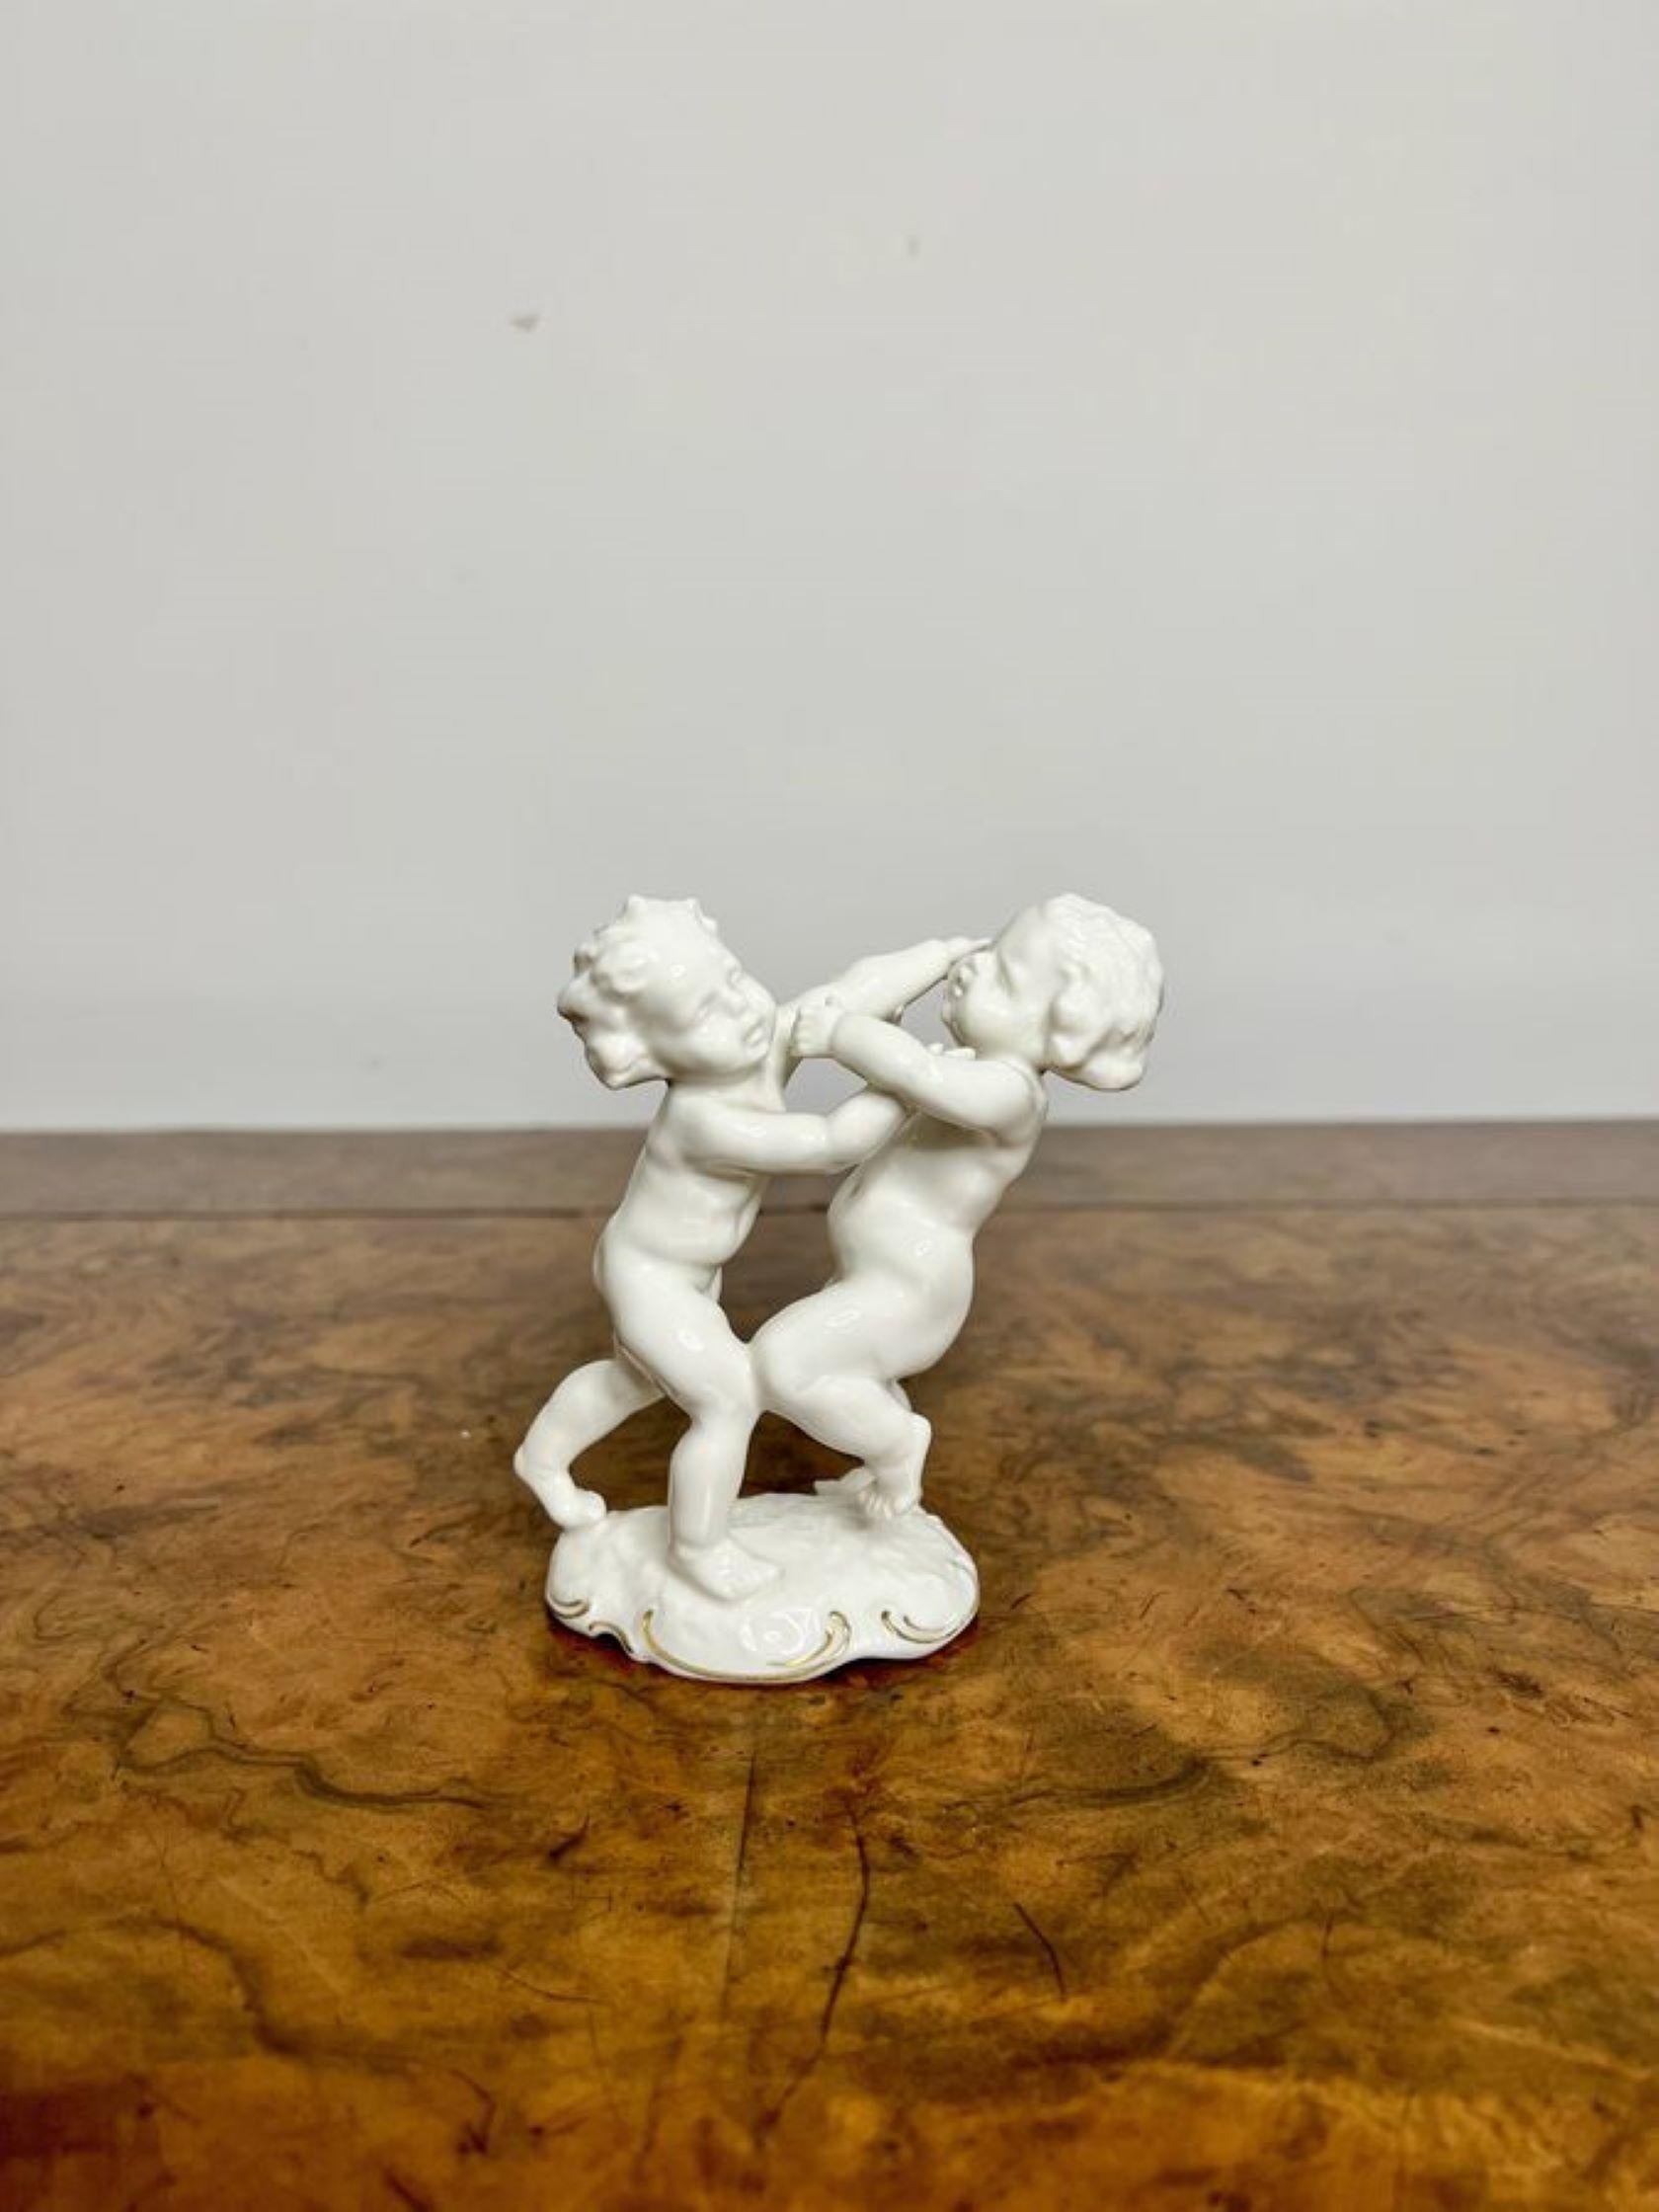 Quality antique porcelain group by Karl Tutter having a Hutschenreuther model of two cherubs wrestling a shaped gilded base.
Stamp to base.

D. 1930